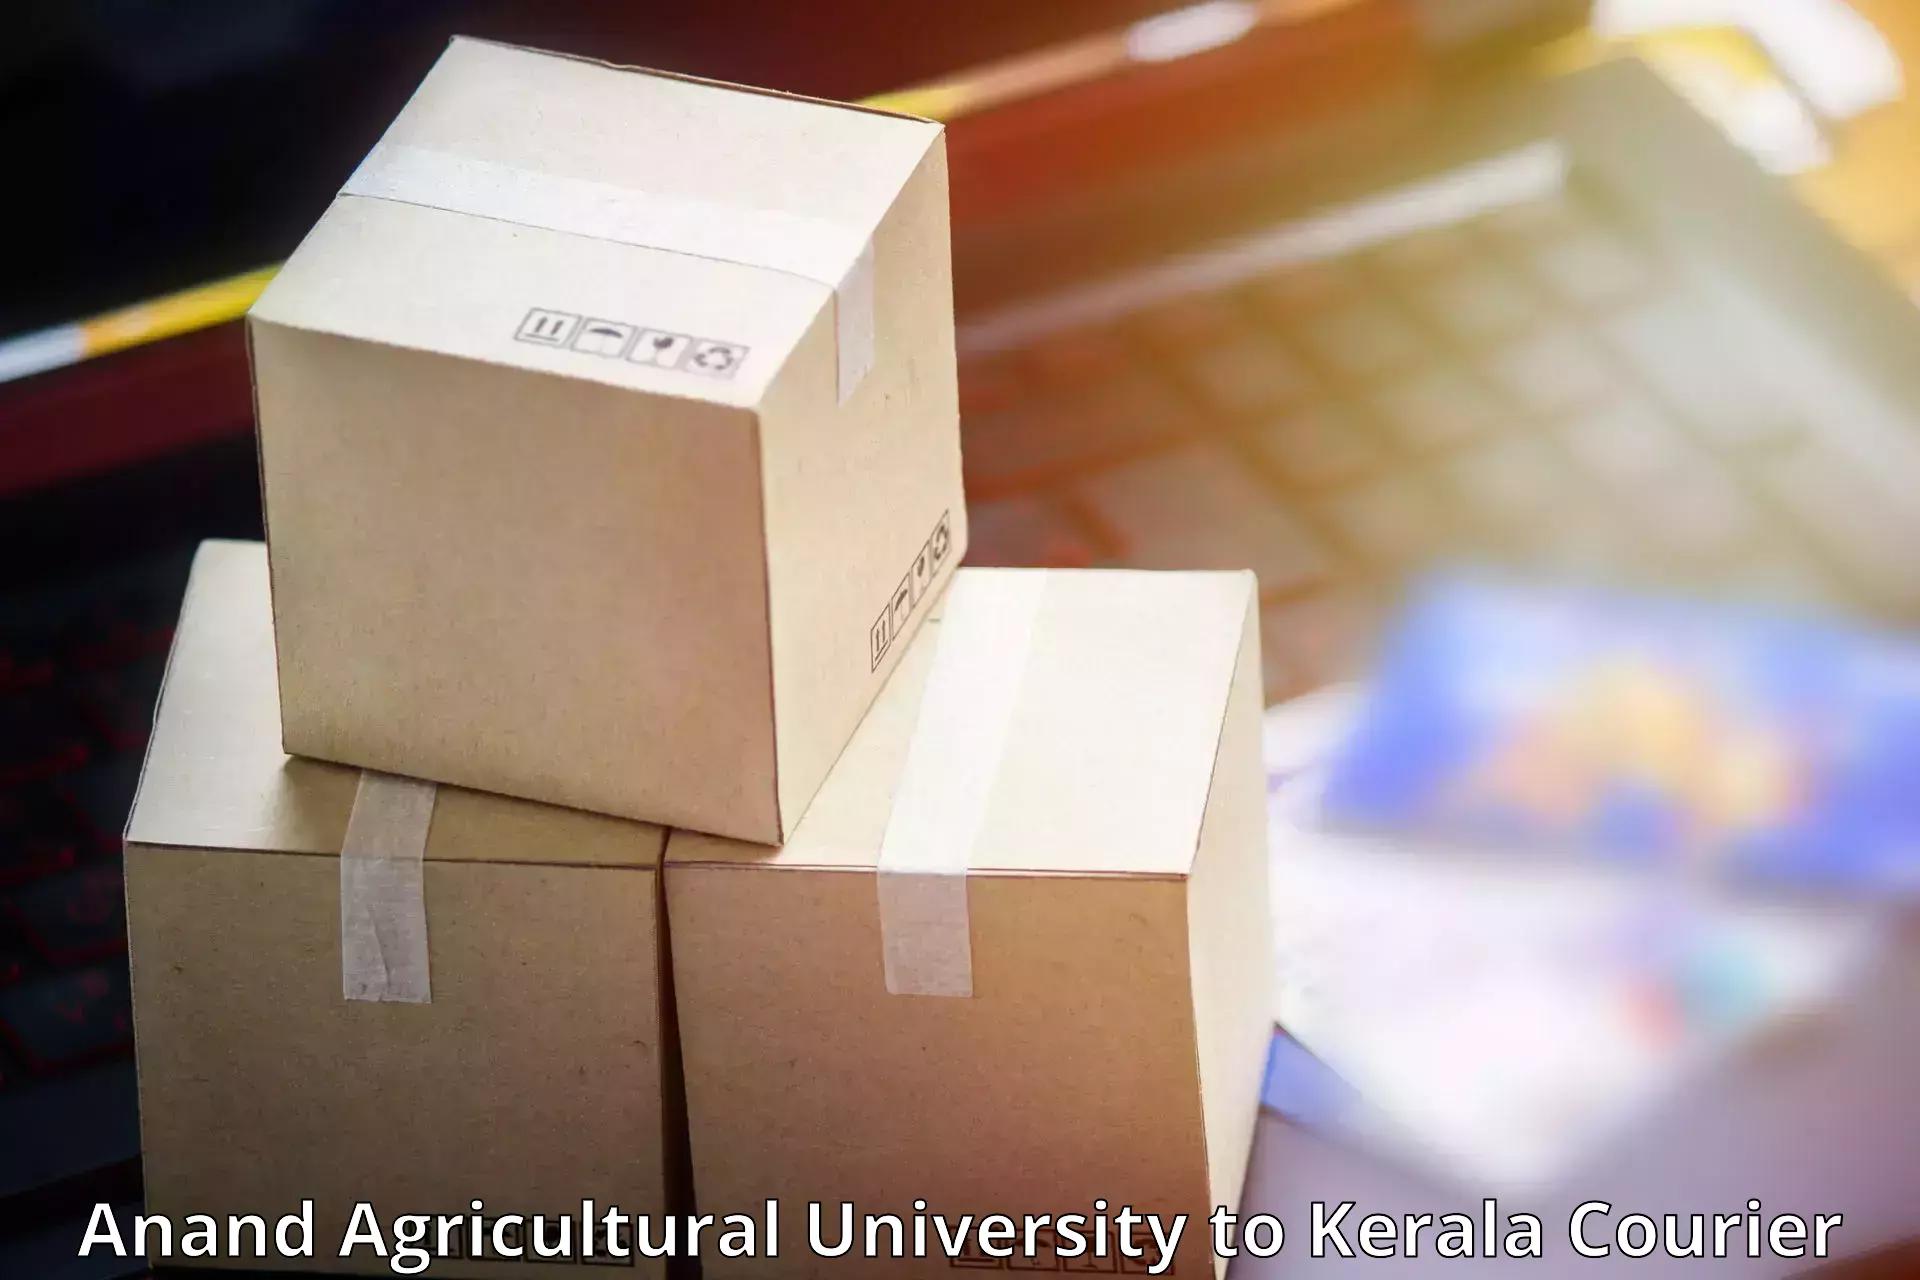 High value parcel delivery Anand Agricultural University to Karimba